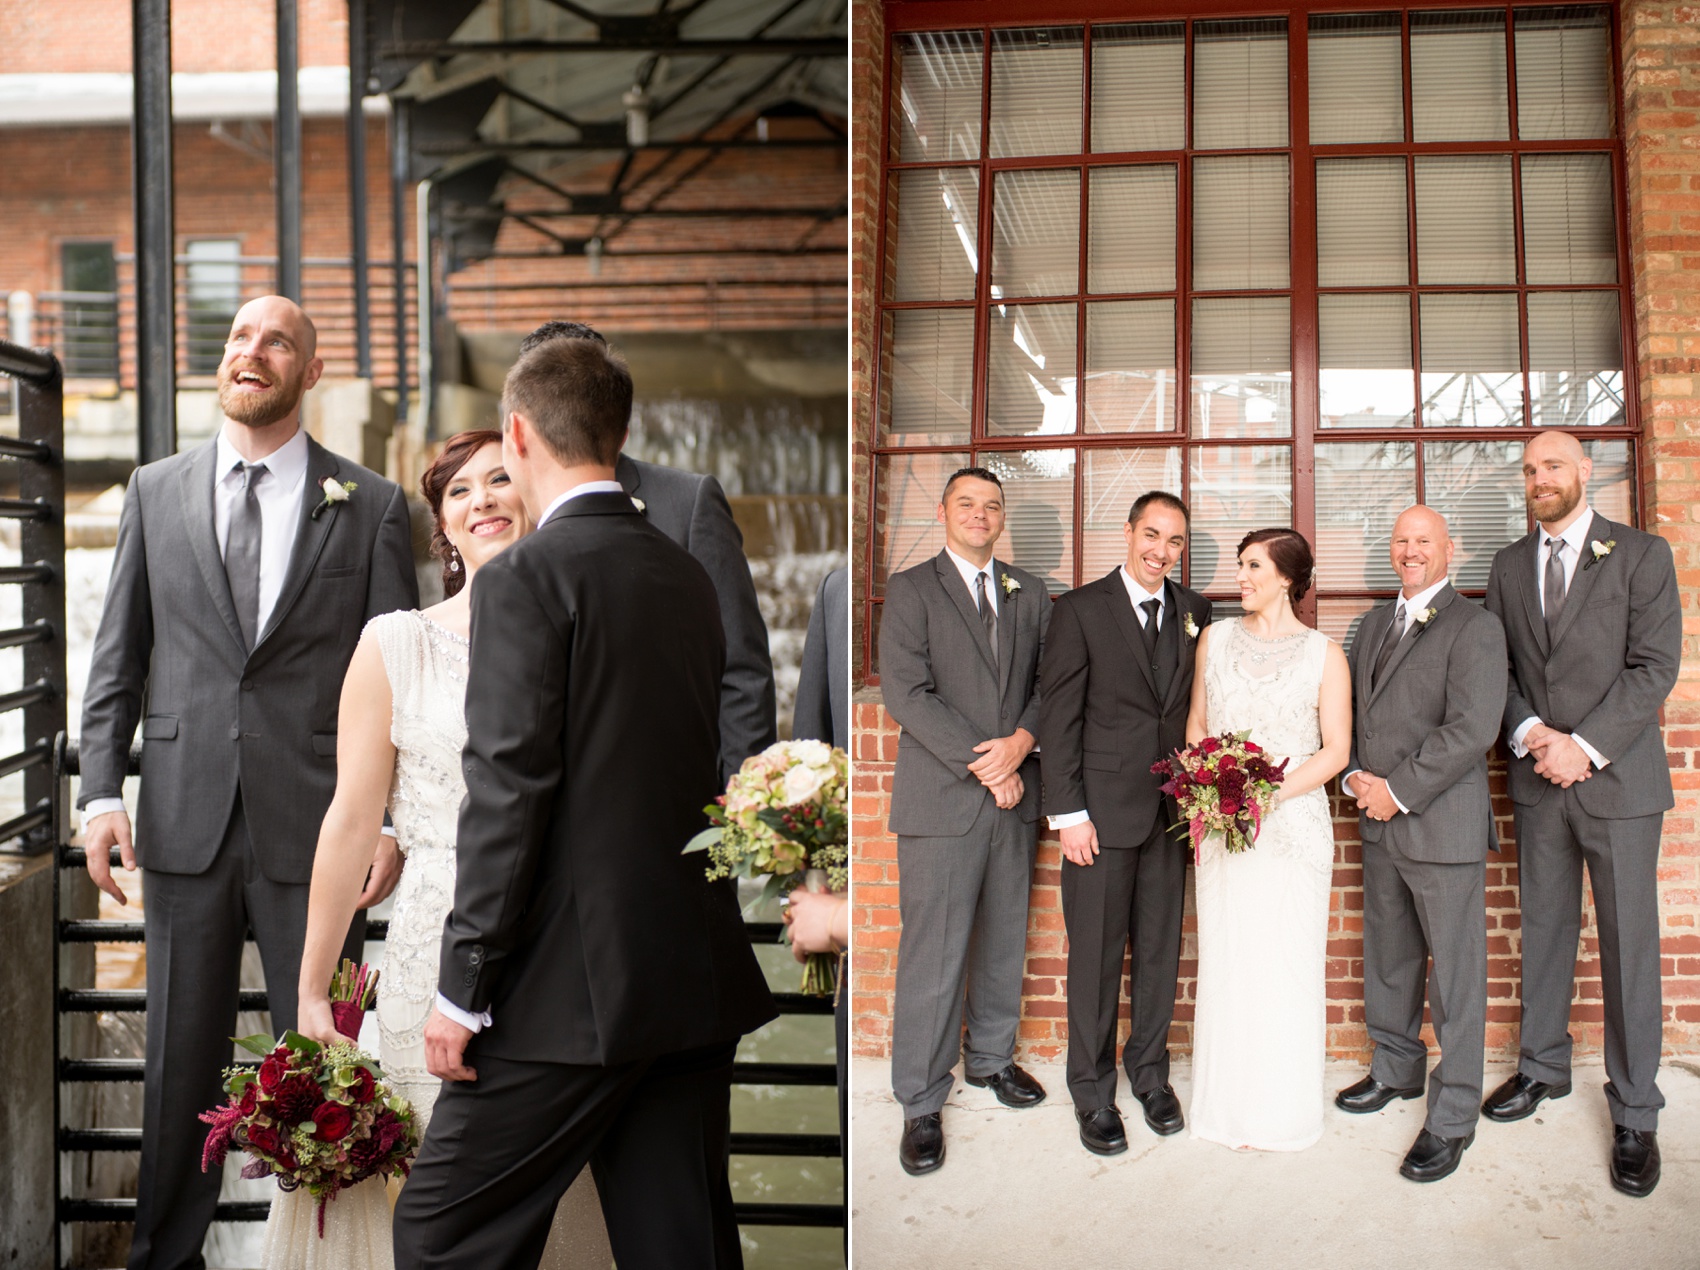 Bay 7 wedding photos by Mikkel Paige Photography. Raleigh wedding photographer captures the groomsmen in grey.